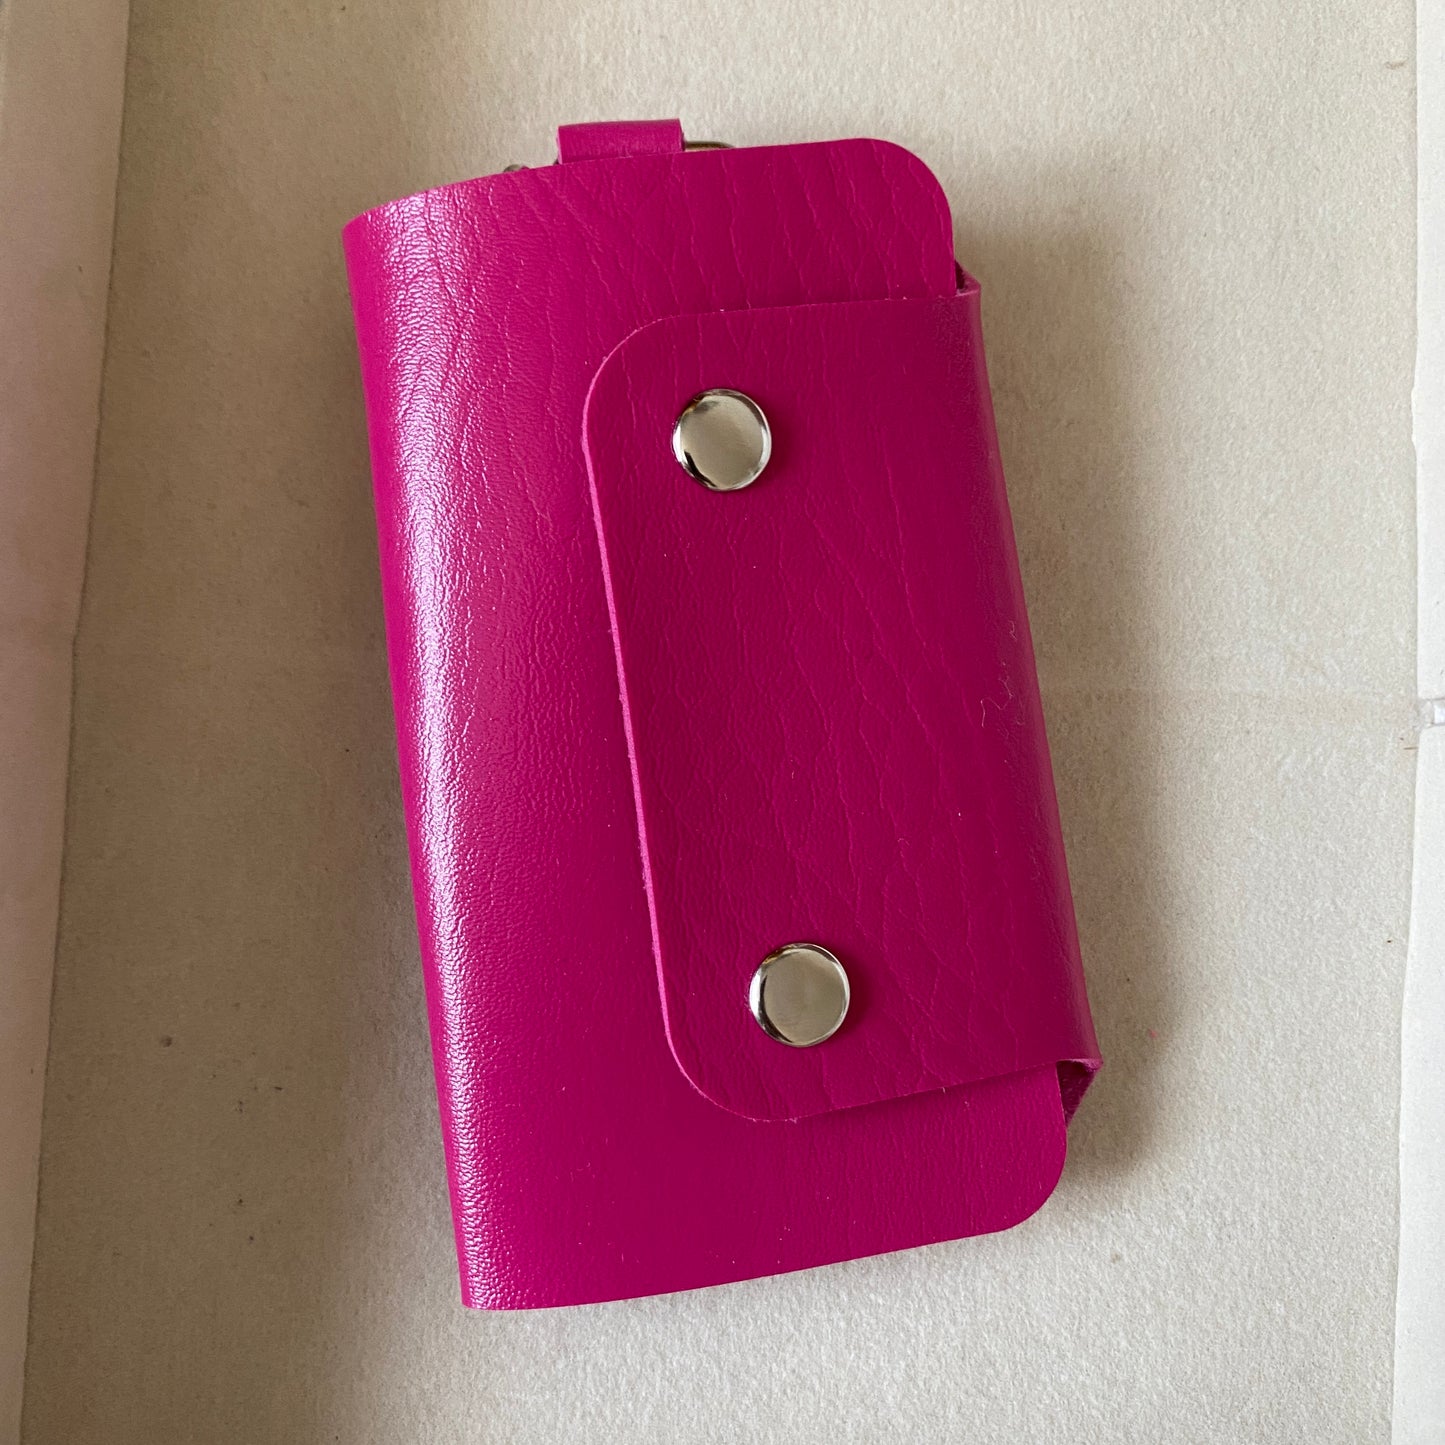 Pink Leather Key Chain Wallet